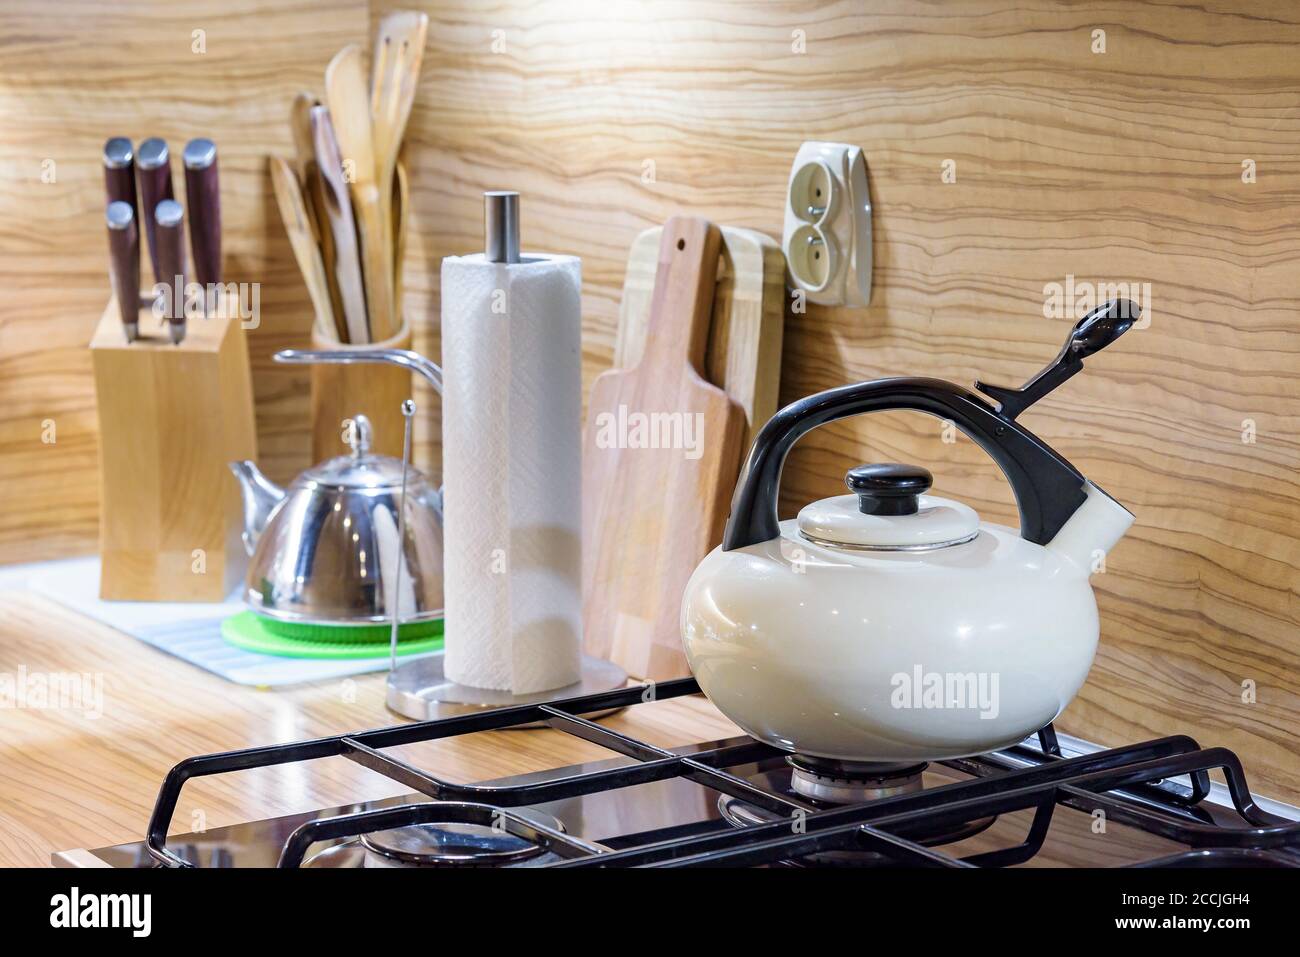 Kitchen utensils on a wooden worktop with led backlihgt Stock Photo